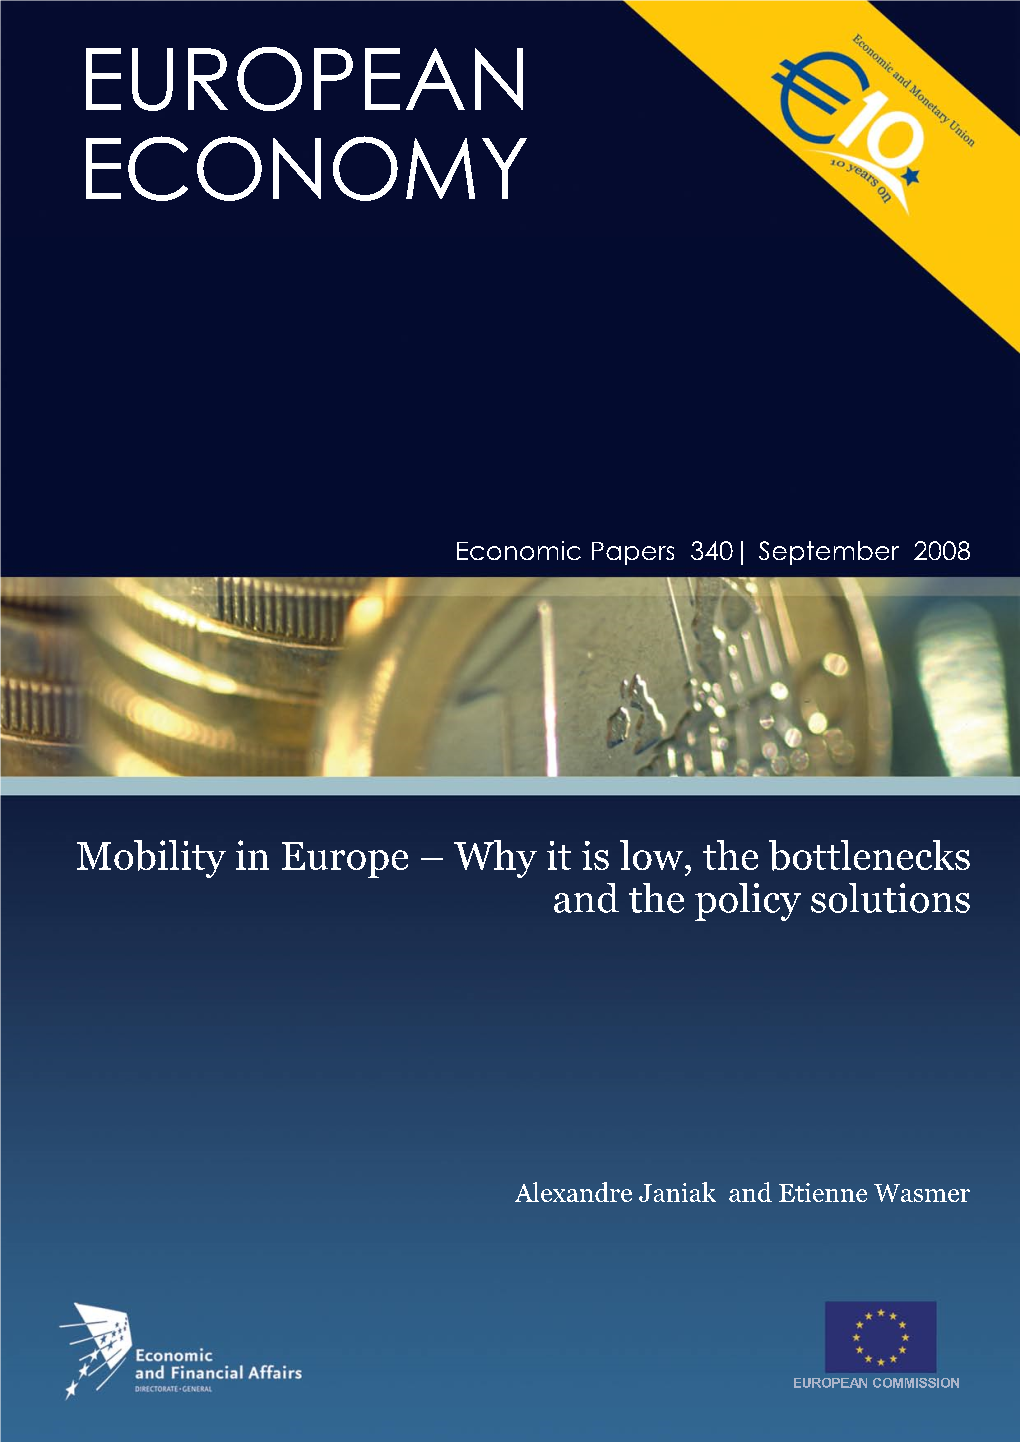 Mobility in Europe – Why It Is Low, the Bottlenecks and the Policy Solutions